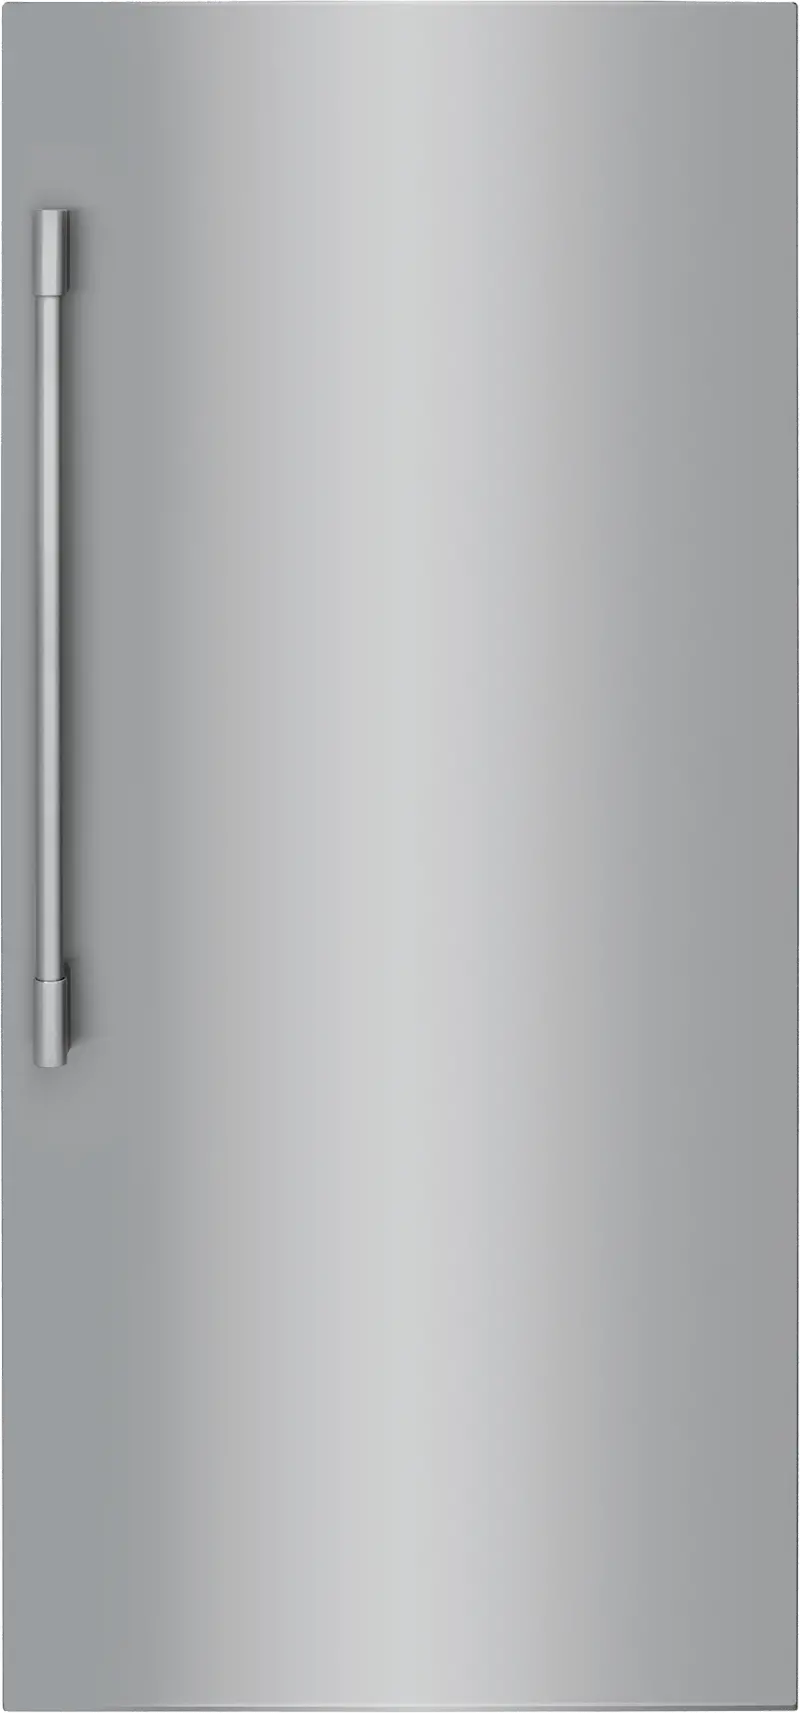 Stainless Steel Frigidaire CUREFR180 1.6 Cubic-ft Compact Refrigerator